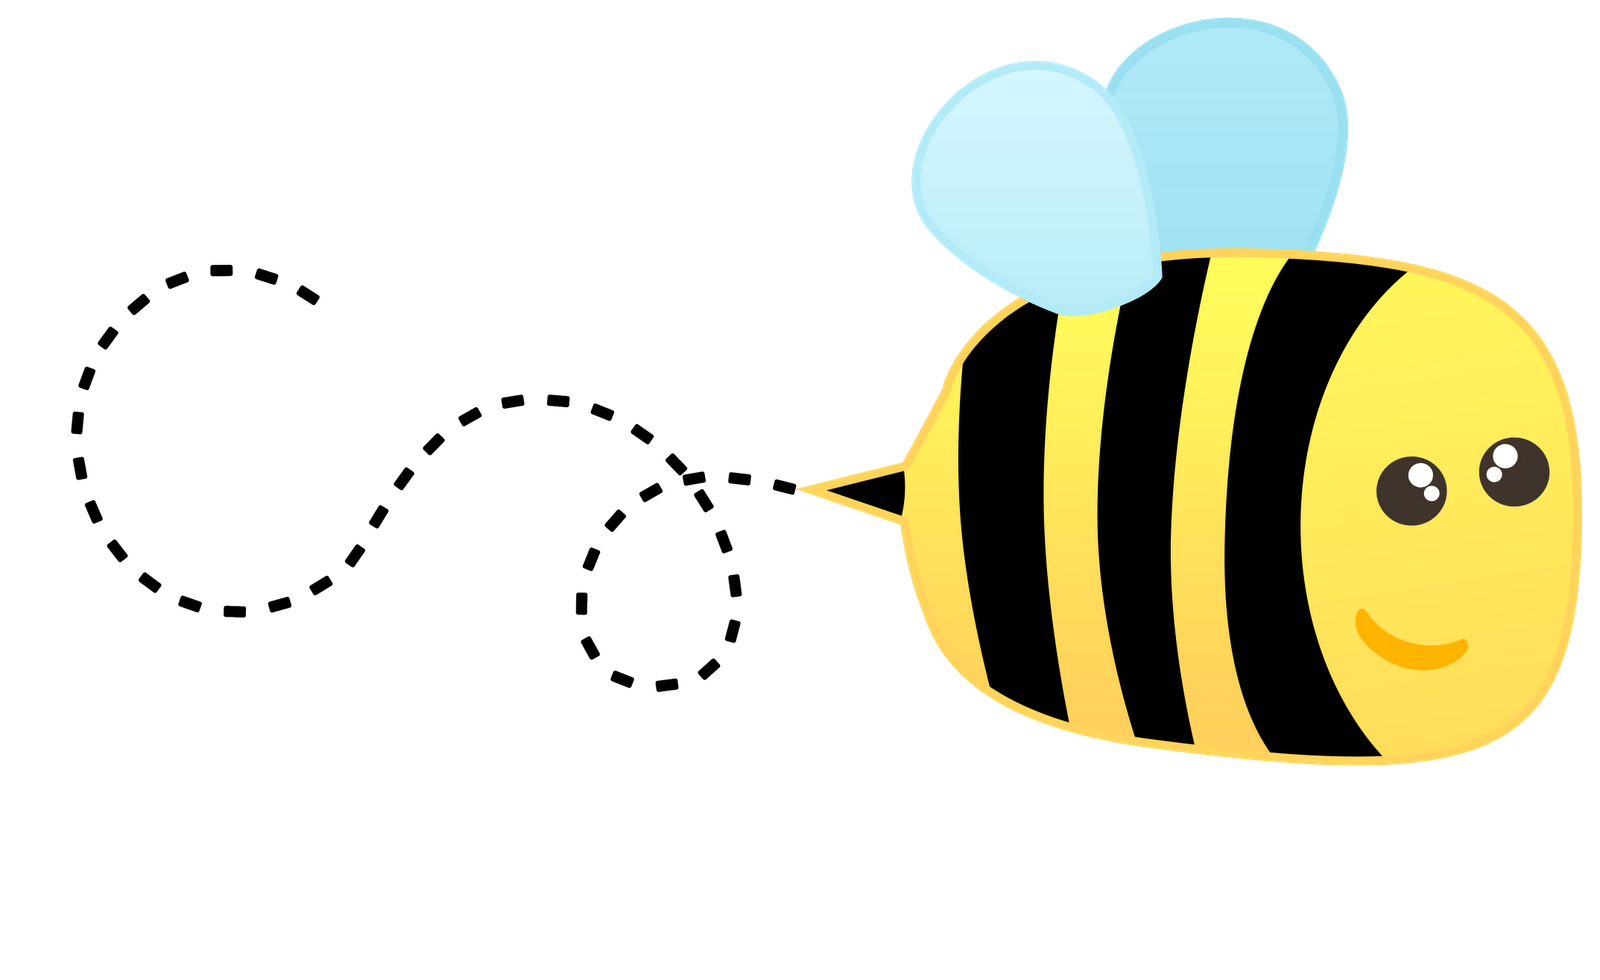 Cute Bee Png - ClipArt Best